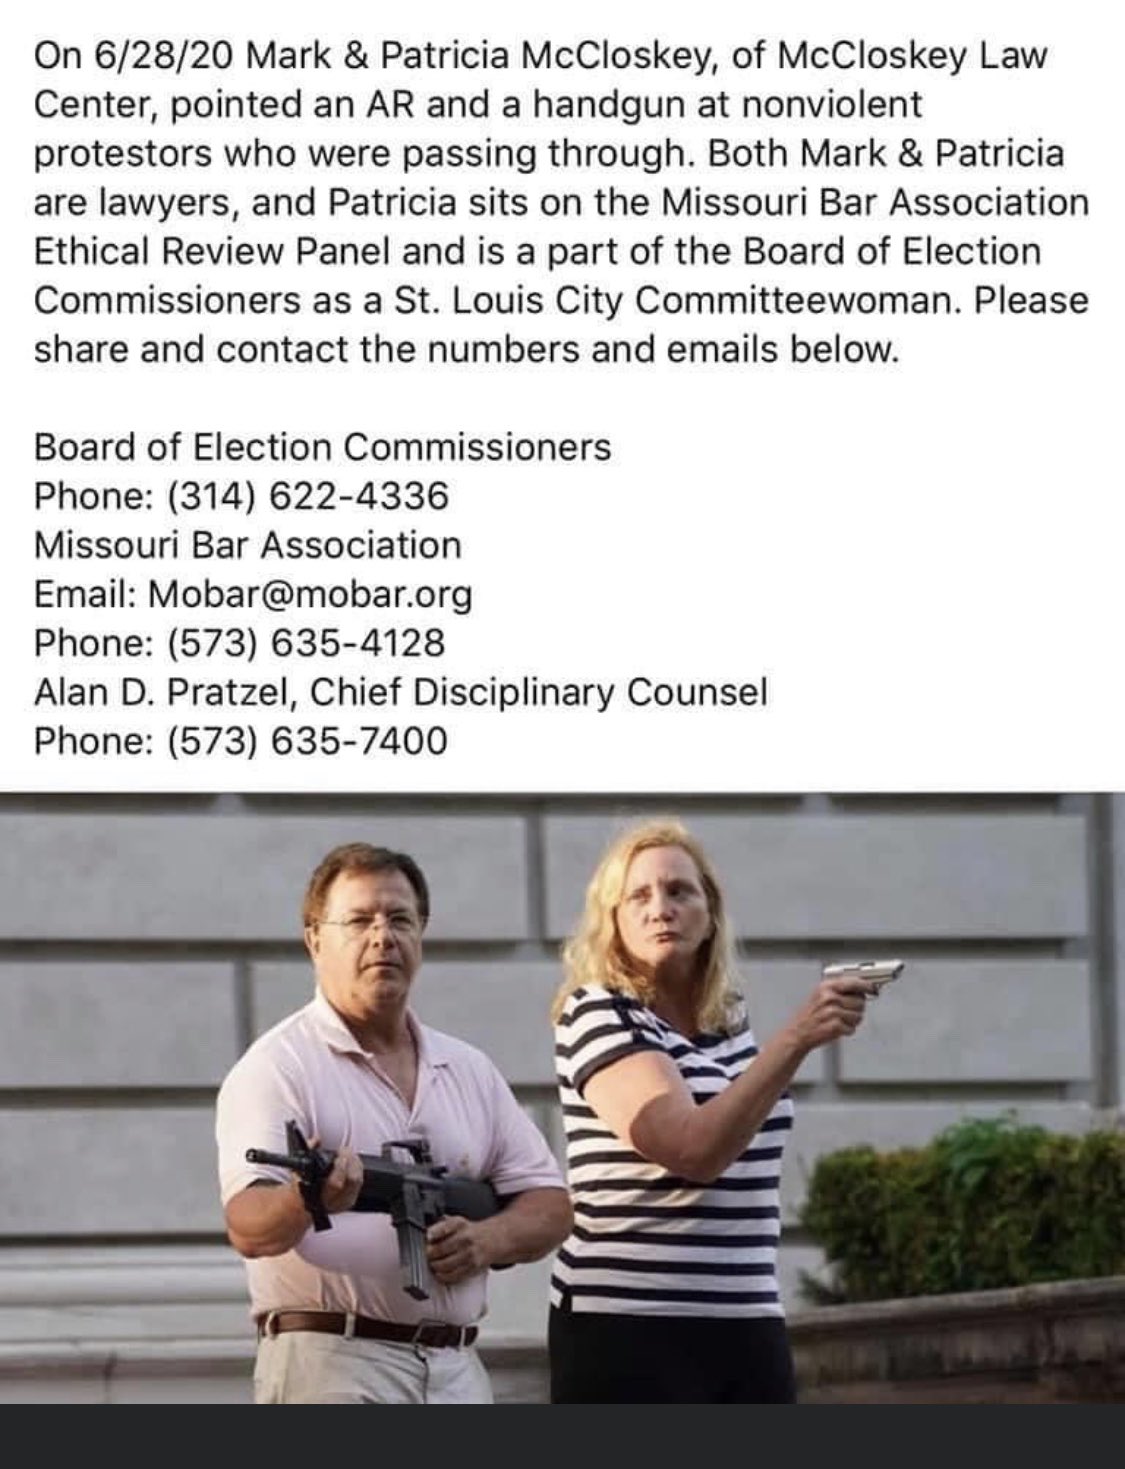 Black, Ethical Review Board, American Bar Association Wholesome Memes Black, Ethical Review Board, American Bar Association text: On 6/28/20 Mark & Patricia McCloskey, of McCloskey Law Center, pointed an AR and a handgun at nonviolent protestors who were passing through. Both Mark & Patricia are lawyers, and Patricia sits on the Missouri Bar Association Ethical Review Panel and is a part of the Board of Election Commissioners as a St. Louis City Committeewoman. Please share and contact the numbers and emails below. Board of Election Commissioners Phone: (314) 622-4336 Missouri Bar Association Email: Mobar@mobar.org Phone: (573) 635-4128 Alan D. Pratzel, Chief Disciplinary Counsel Phone: (573) 635-7400 